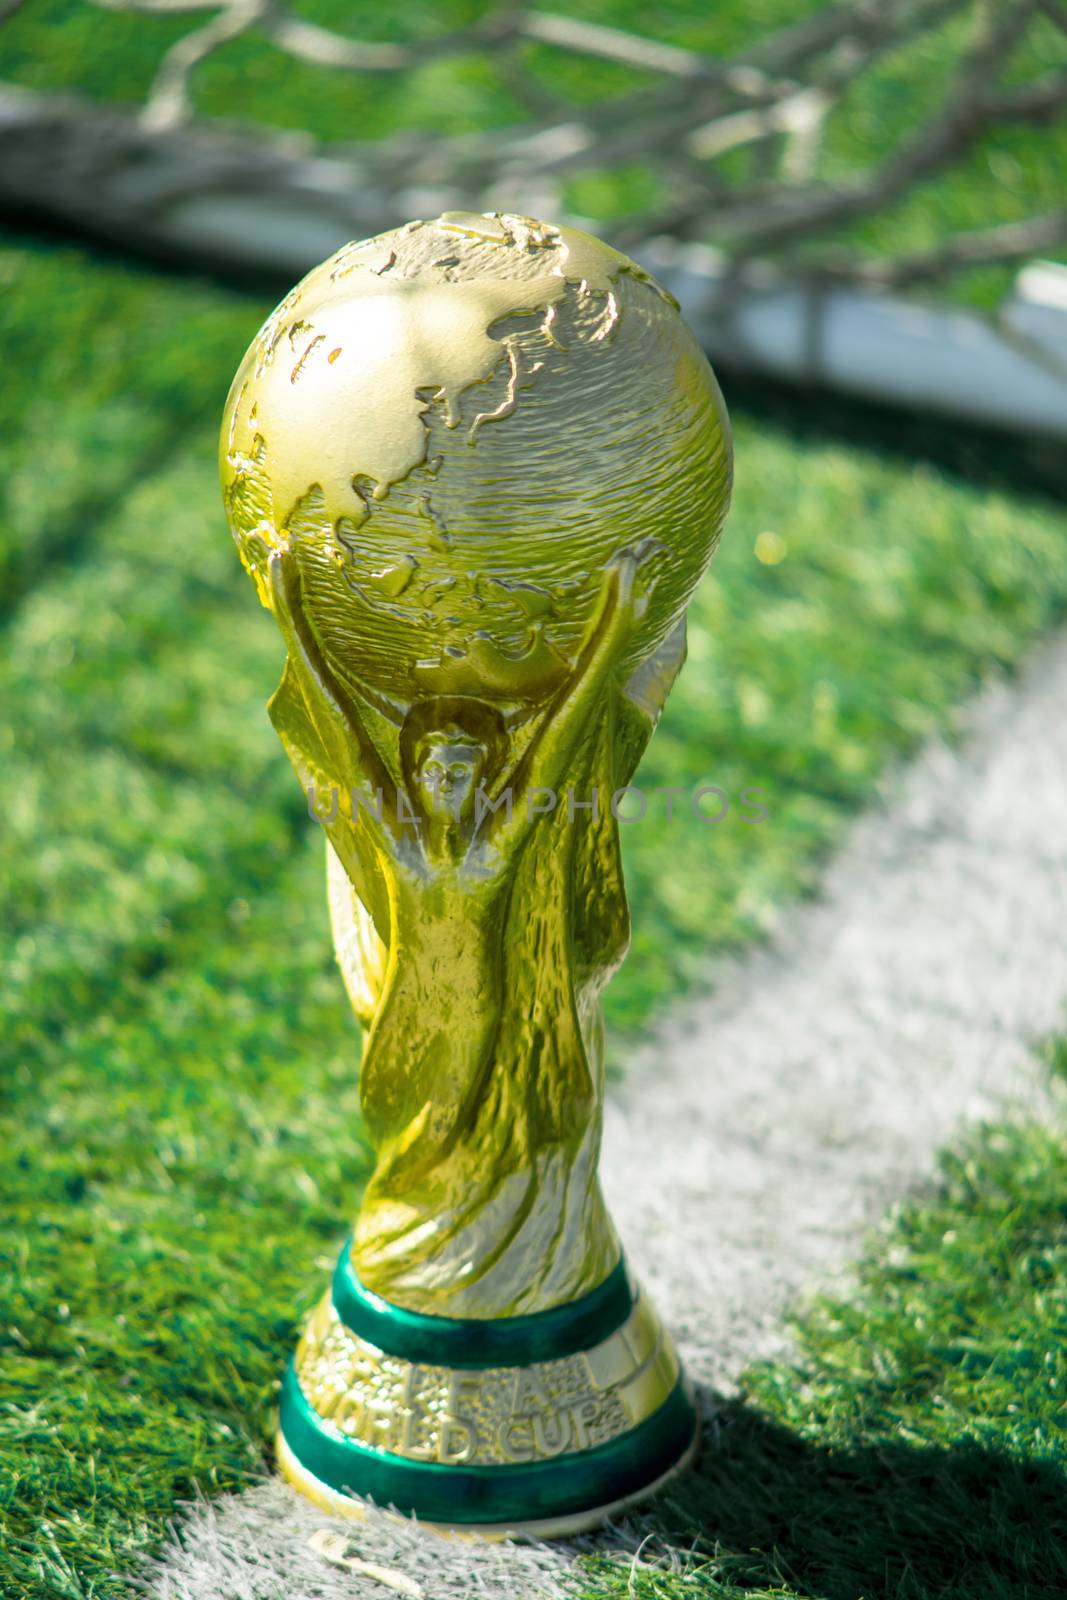 April 9, 2018 Moscow, Russia Trophy of the FIFA World Cup on the green grass of the football field.